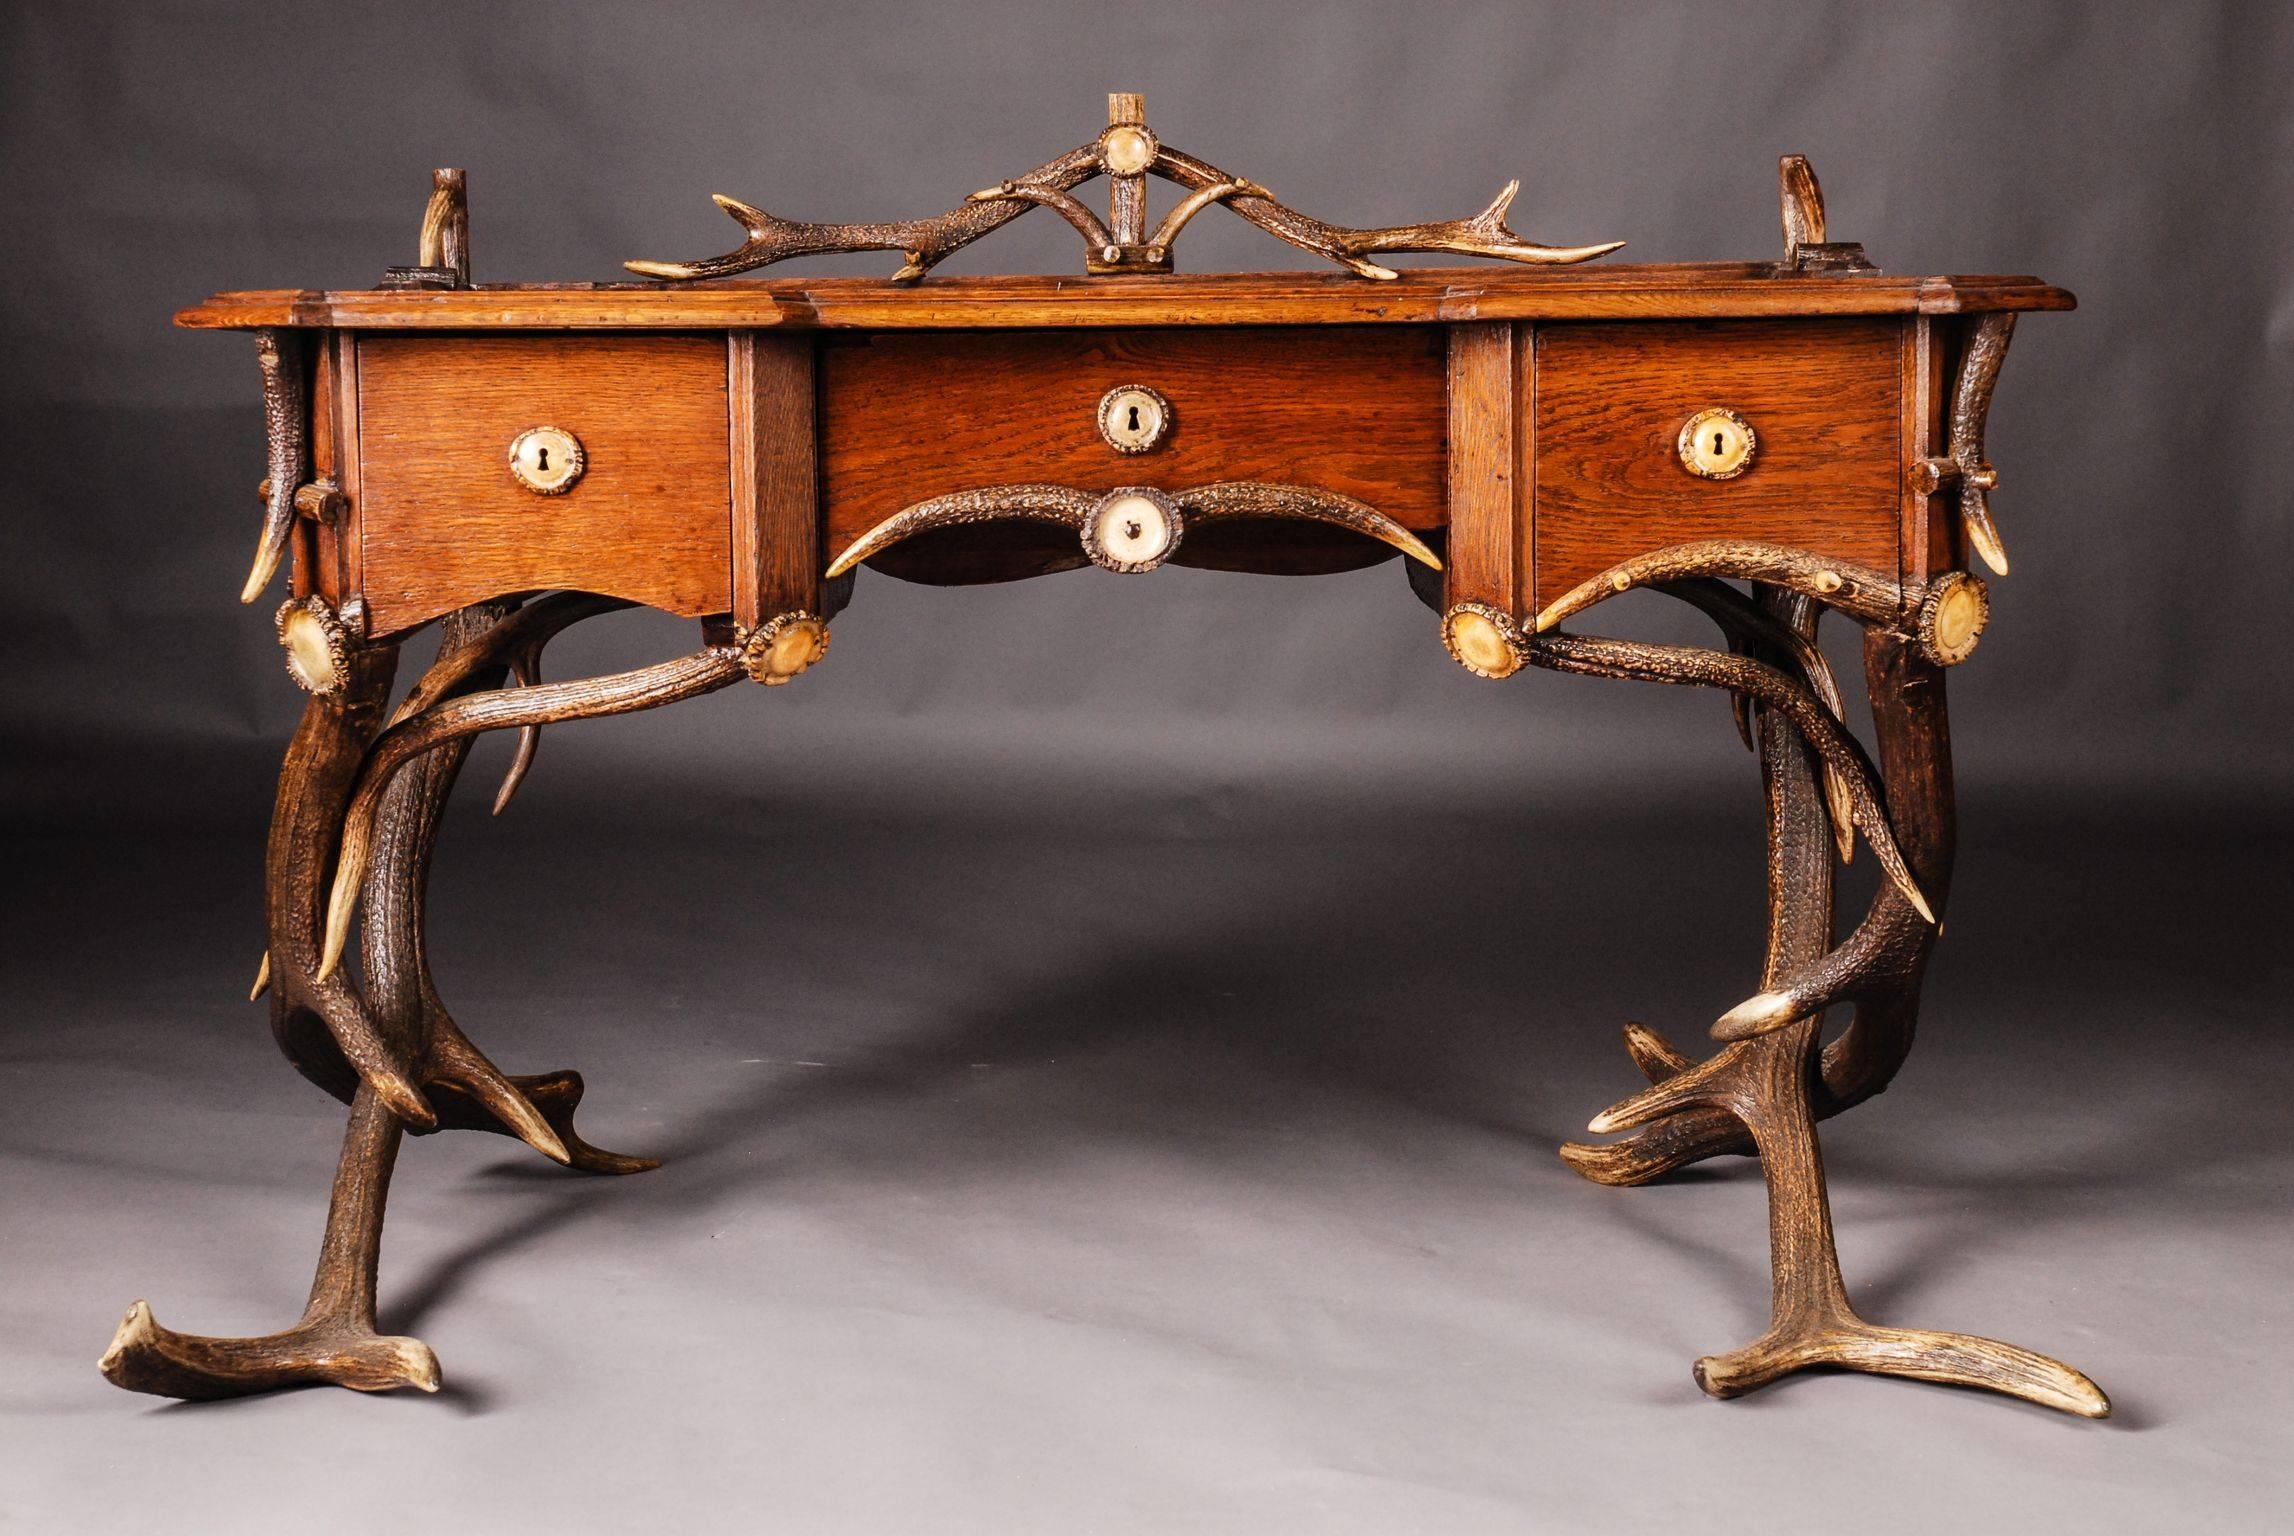 Musealer antique antler desk, circa 1840-1860.
Massive oak body on cross, linked feet. High knee pocket on the front with three drawers of different sizes. Antler decorated top.

Measures in cm:
Overall size height 88 cm, width 127 cm, depth 78